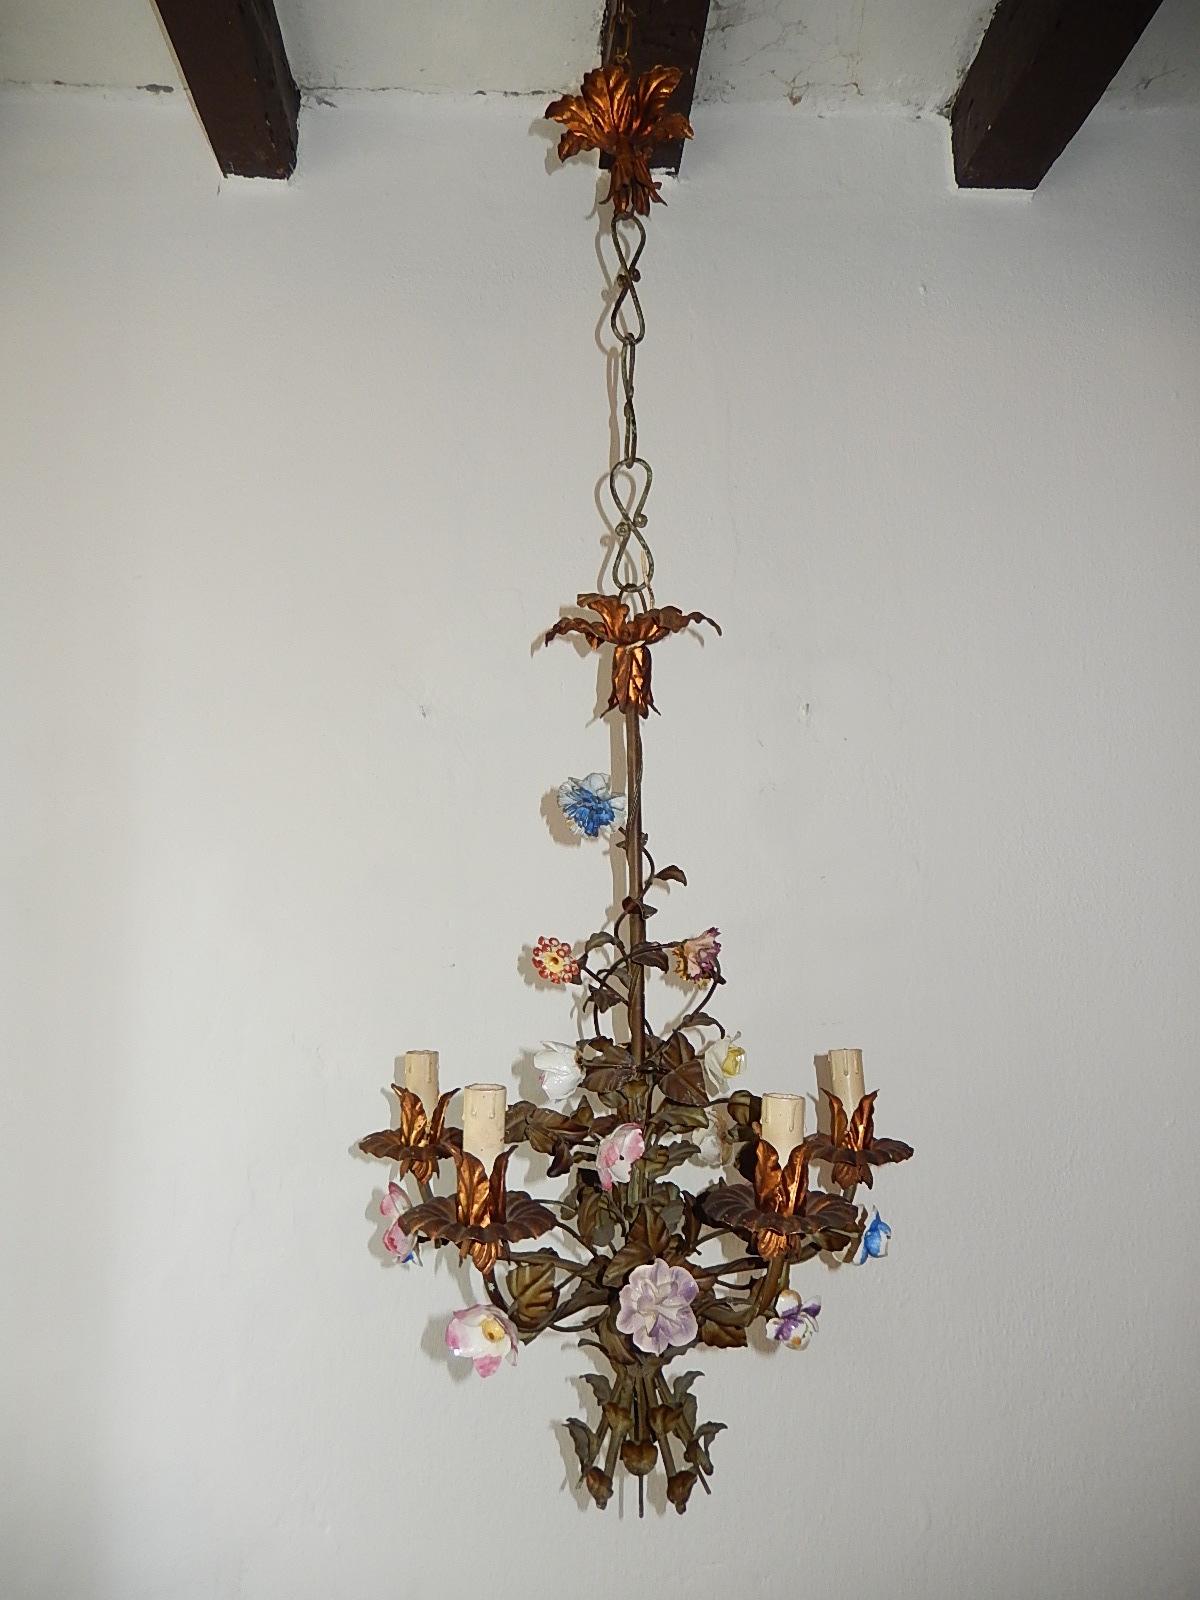 Housing five lights. Original color tole with gold bulb holders, top and canopy. Handmade porcelain flowers, only a few chips. Adding 17 inches of original chain and canopy. Re-wired and ready to hang! Free priority UPS shipping from Italy.